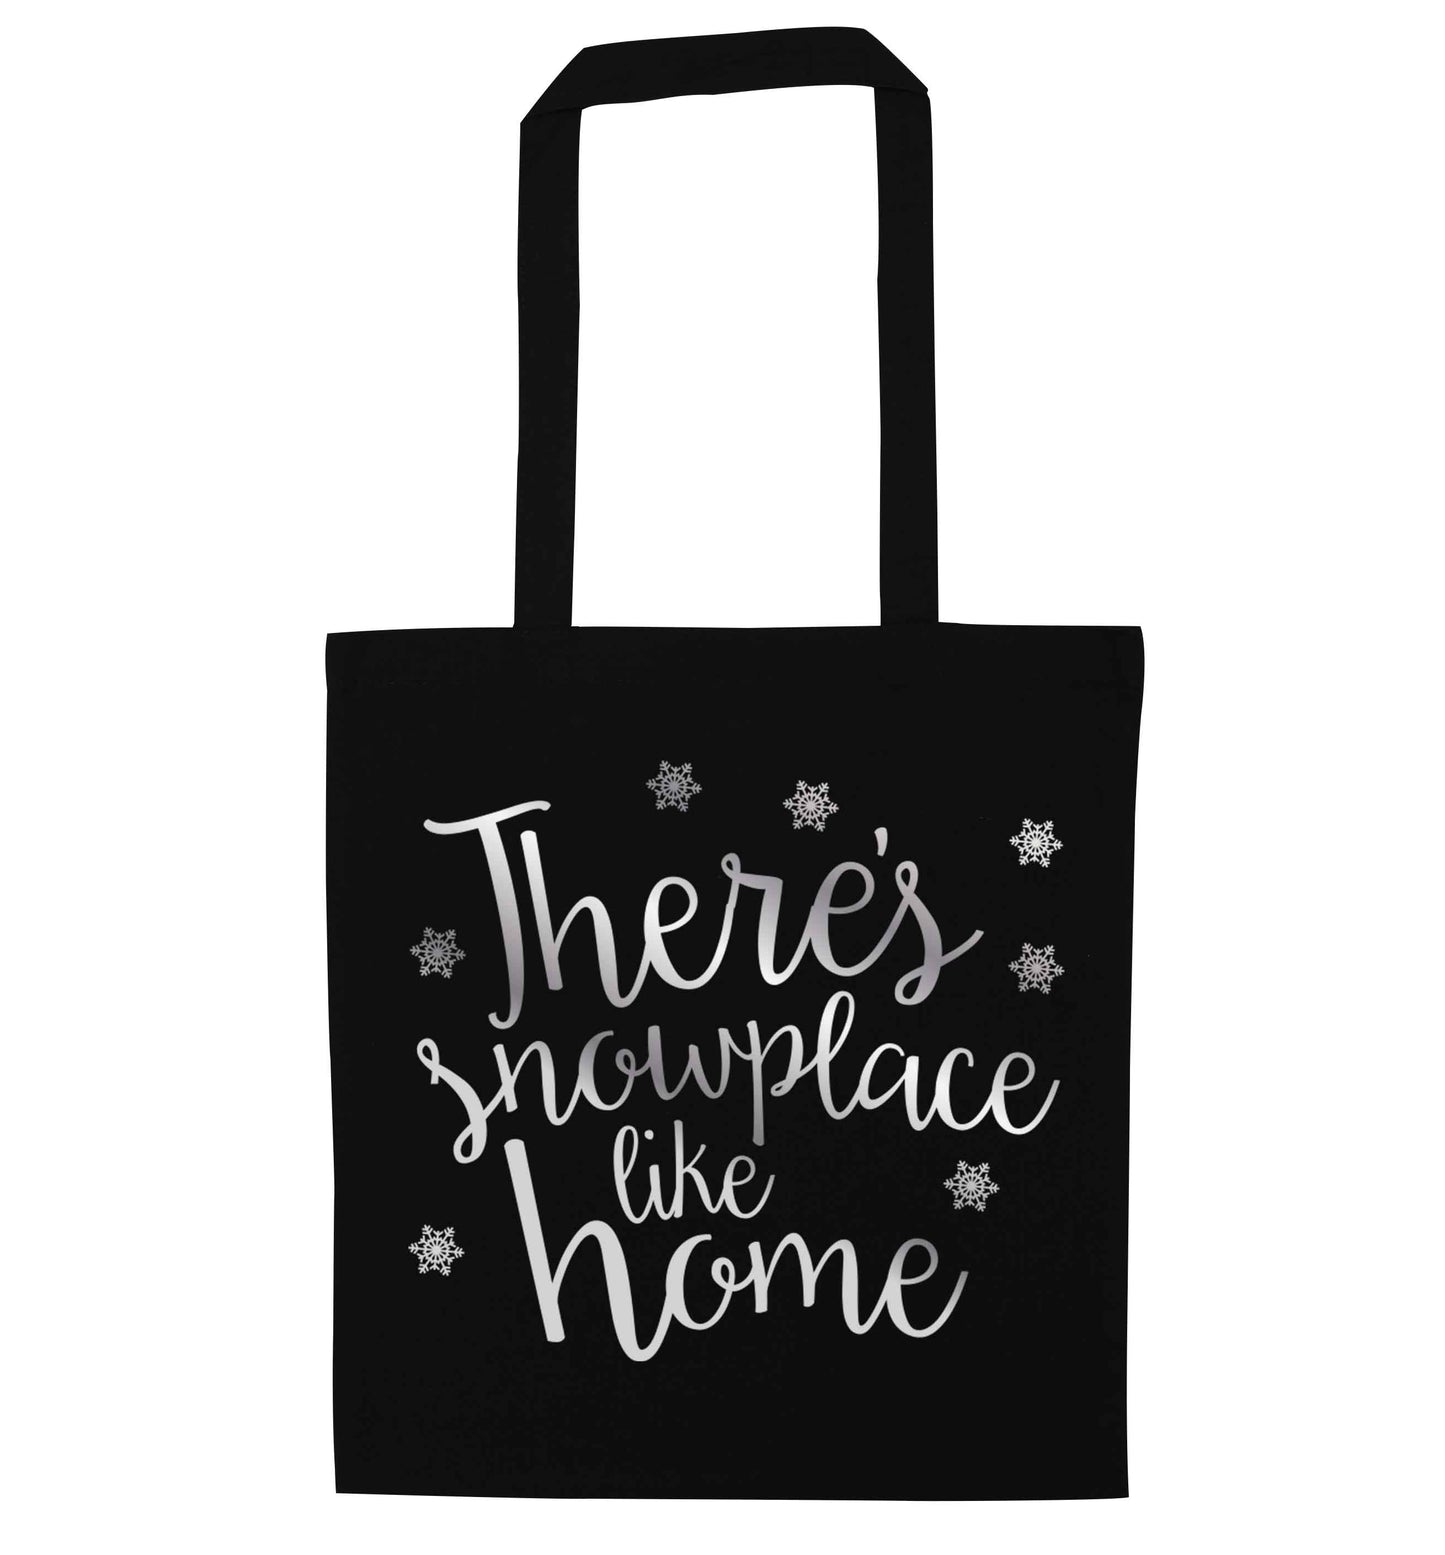 There's snowplace like home - metallic silver black tote bag